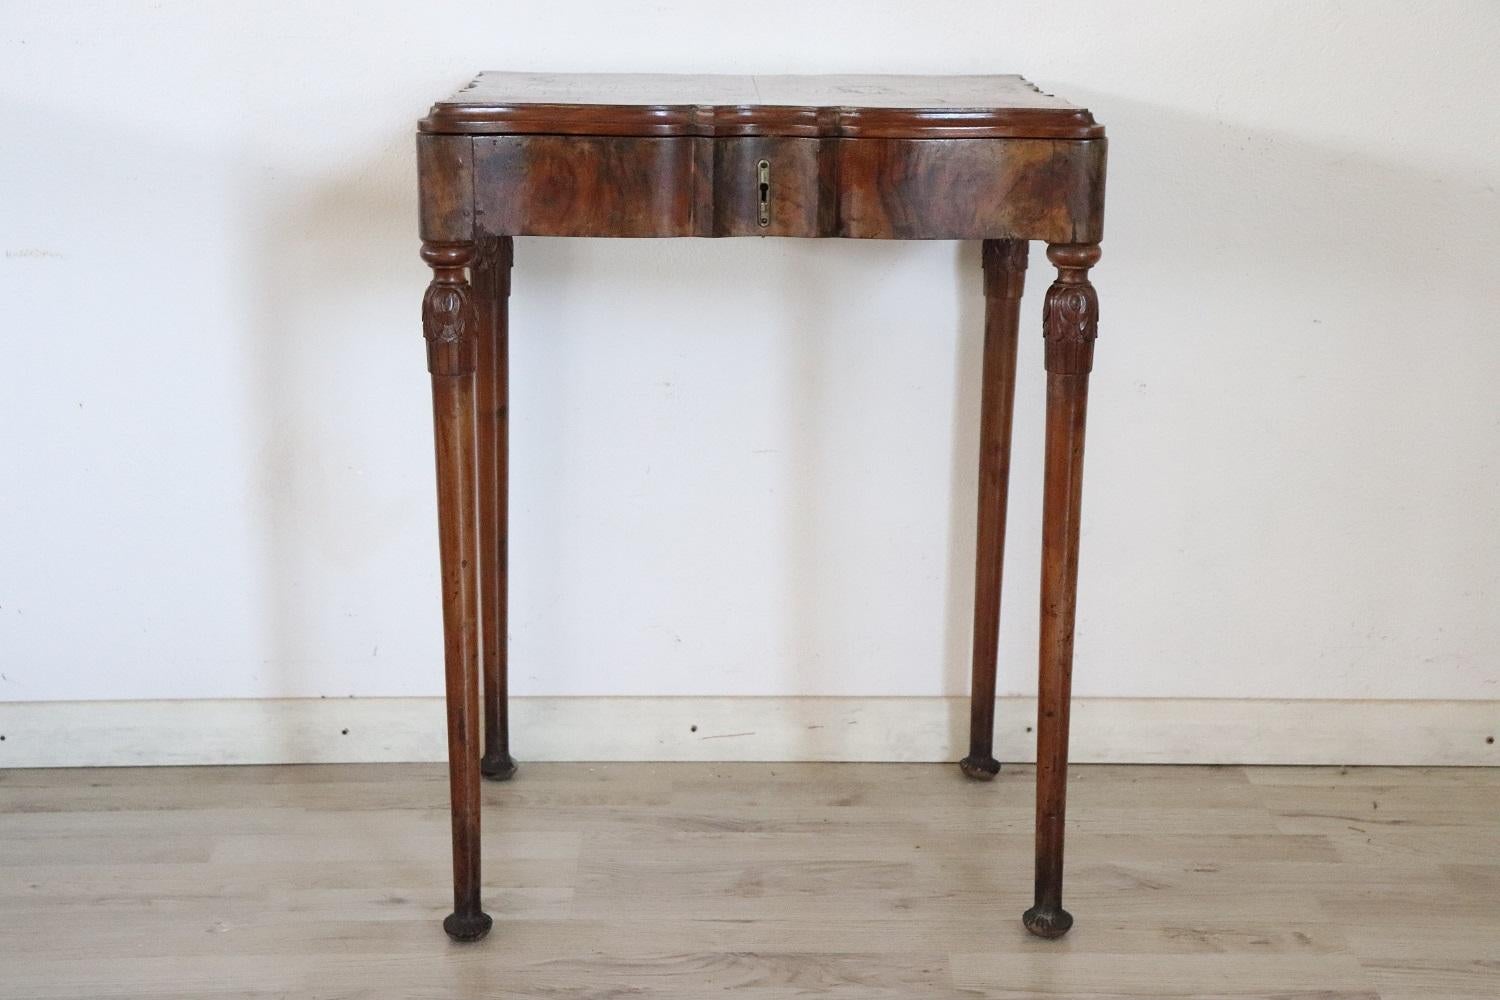 Rare and fine quality italian Art deco 1920s vanity table with legs are long and slender. Completely in precious walnut root. The top rises and internally we find a mirror and small compartments. This side table is perfect for holding your jewelry.